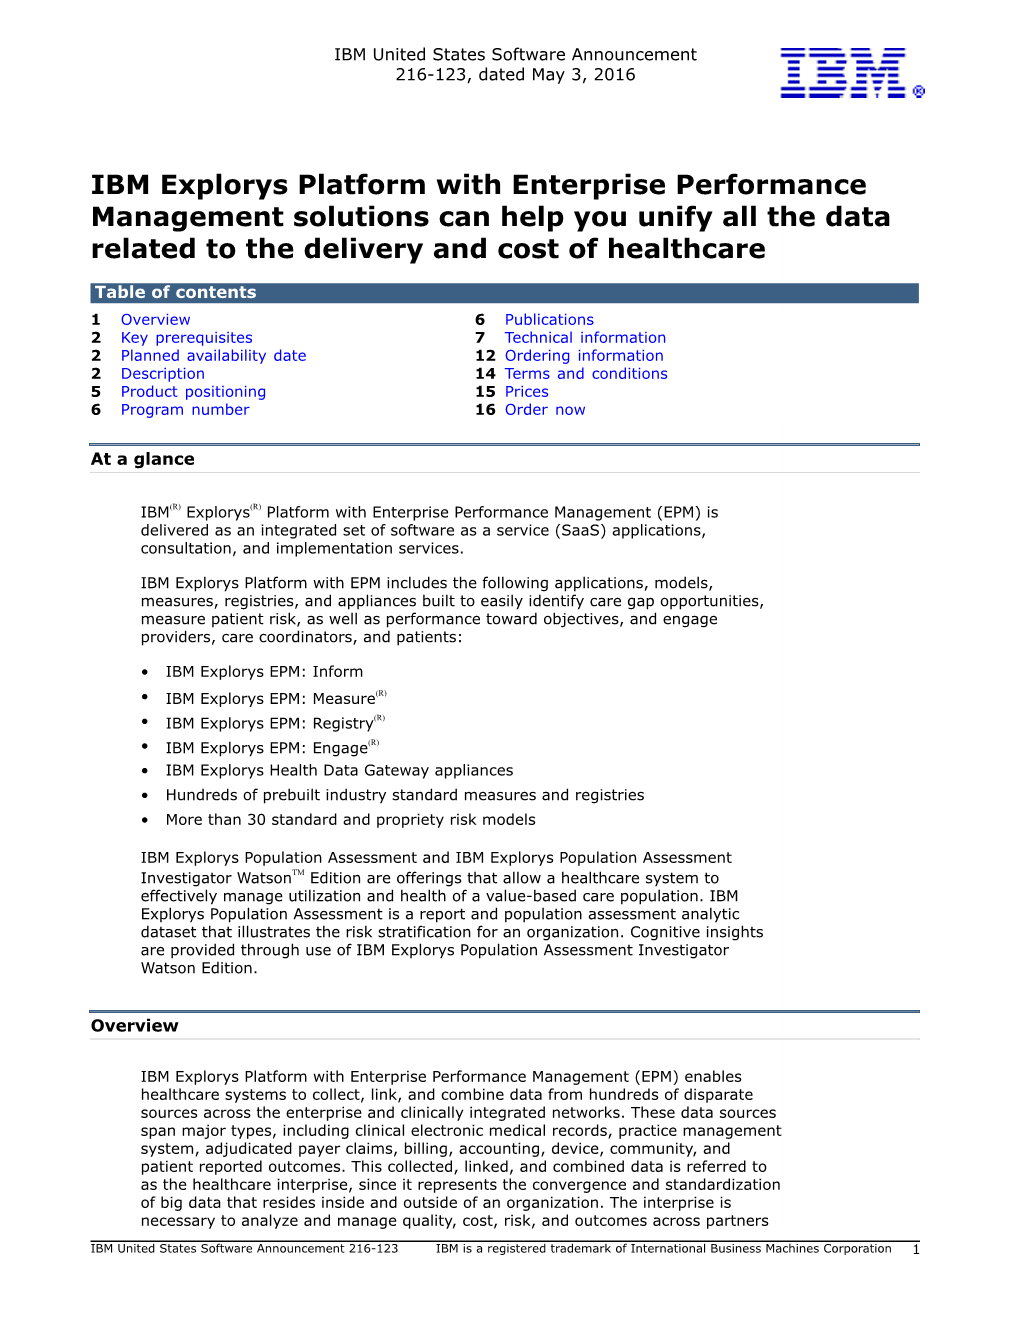 IBM Explorys Platform with Enterprise Performance Management Solutions Can Help You Unify All the Data Related to the Delivery and Cost of Healthcare